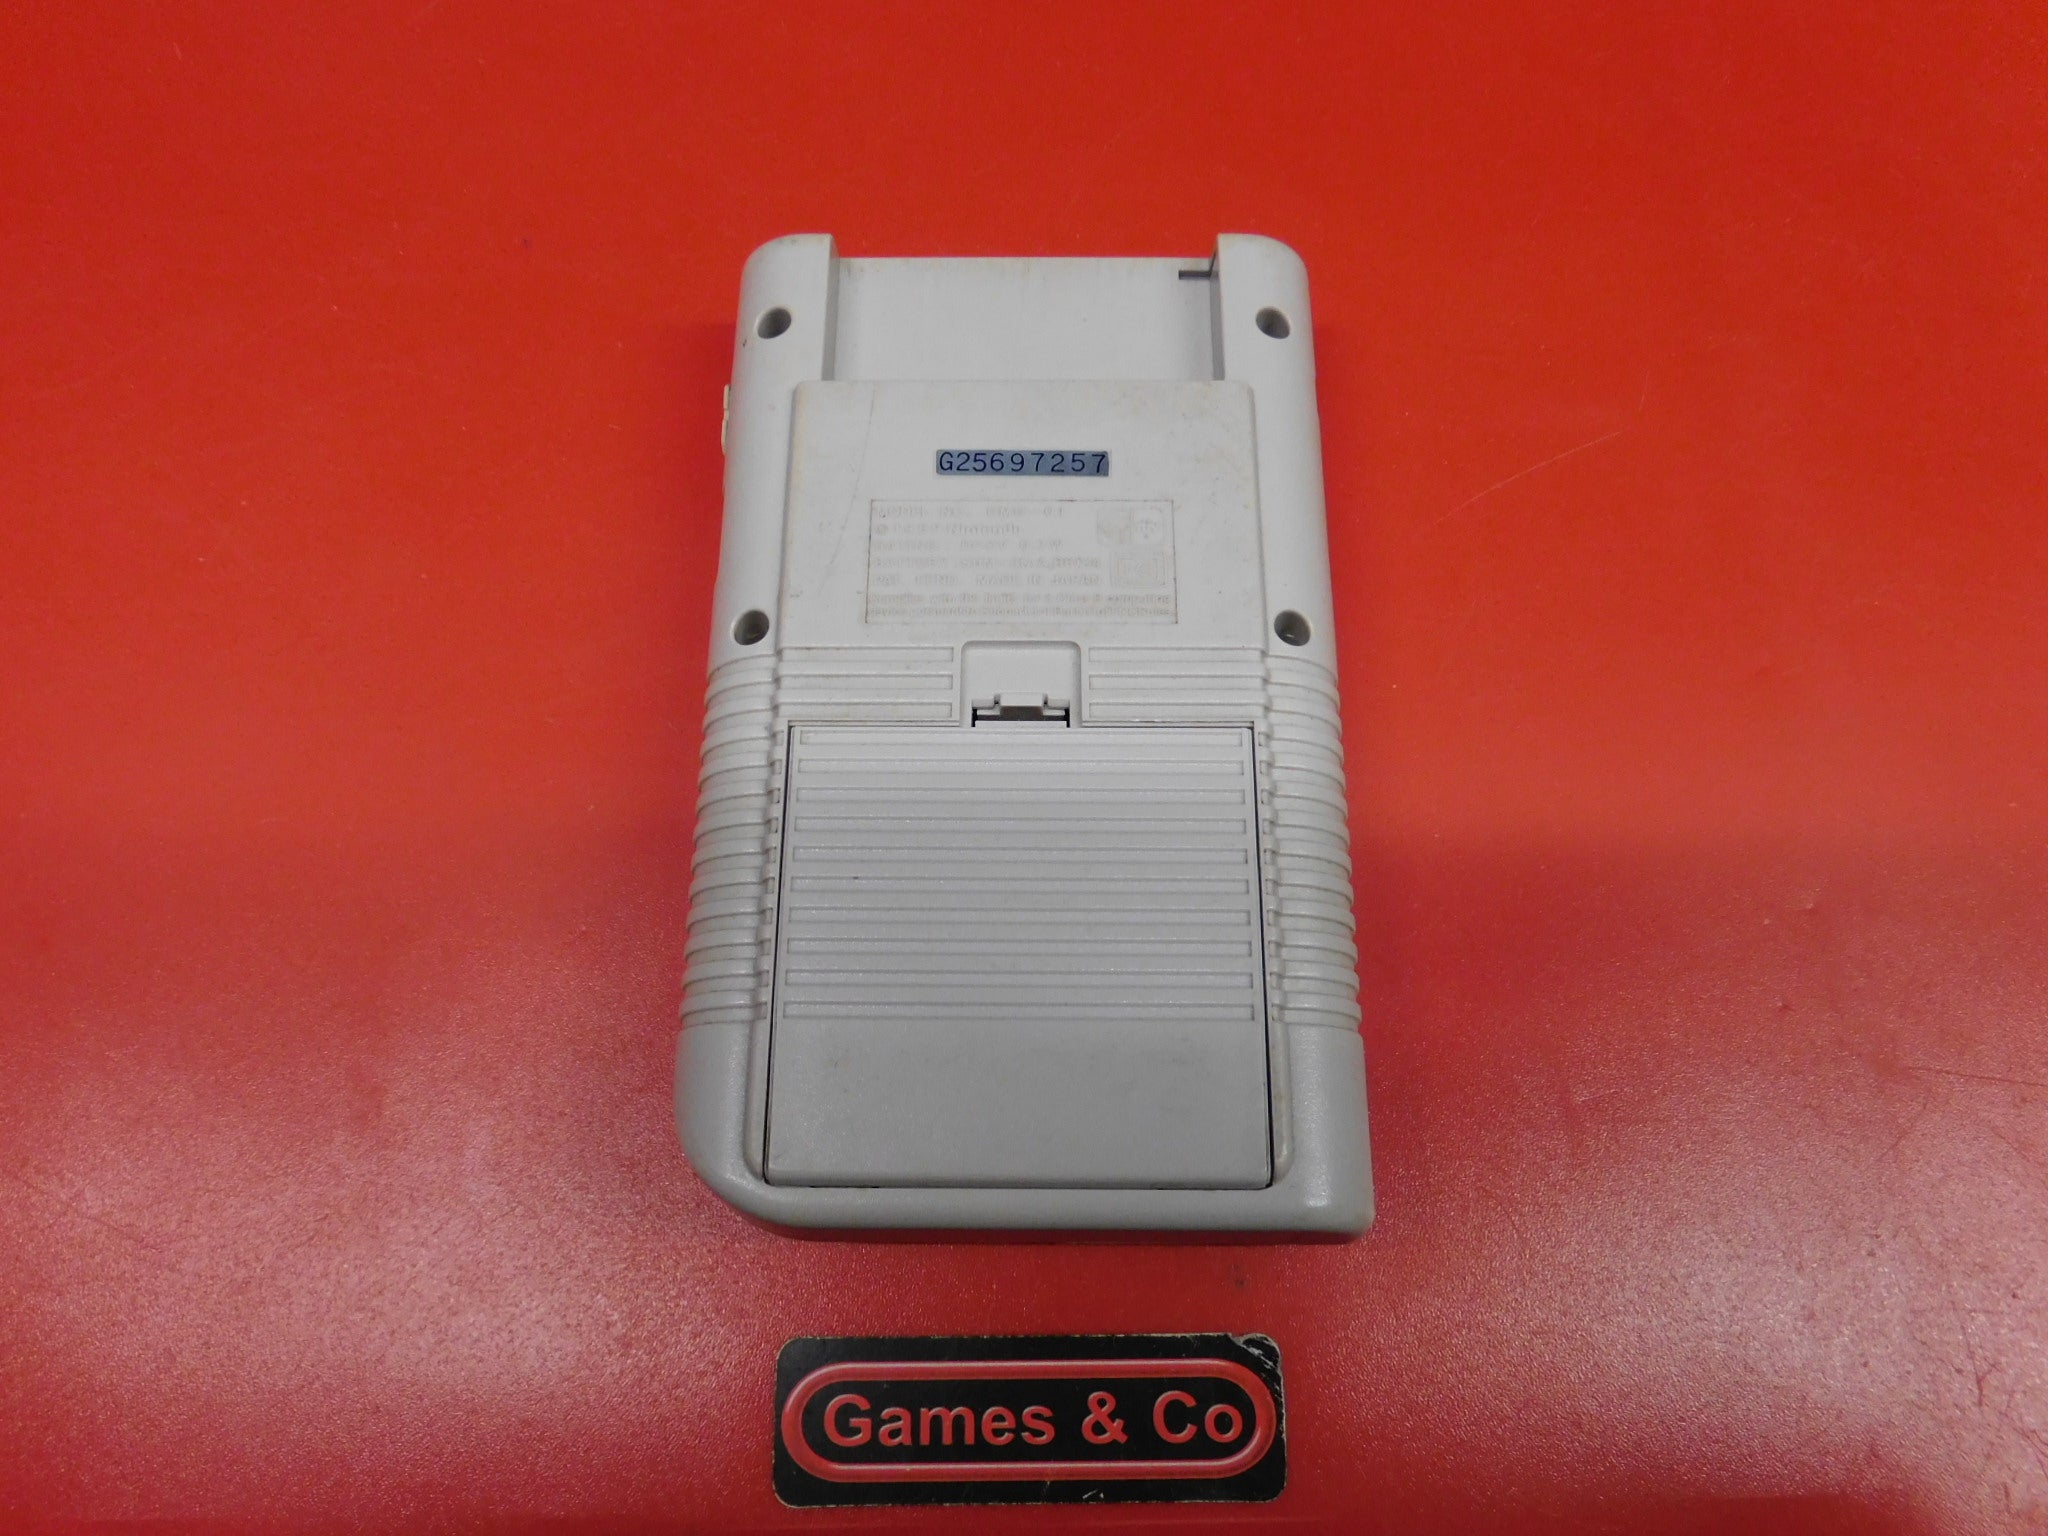 GAMEBOY CLASSIC CONSOLE